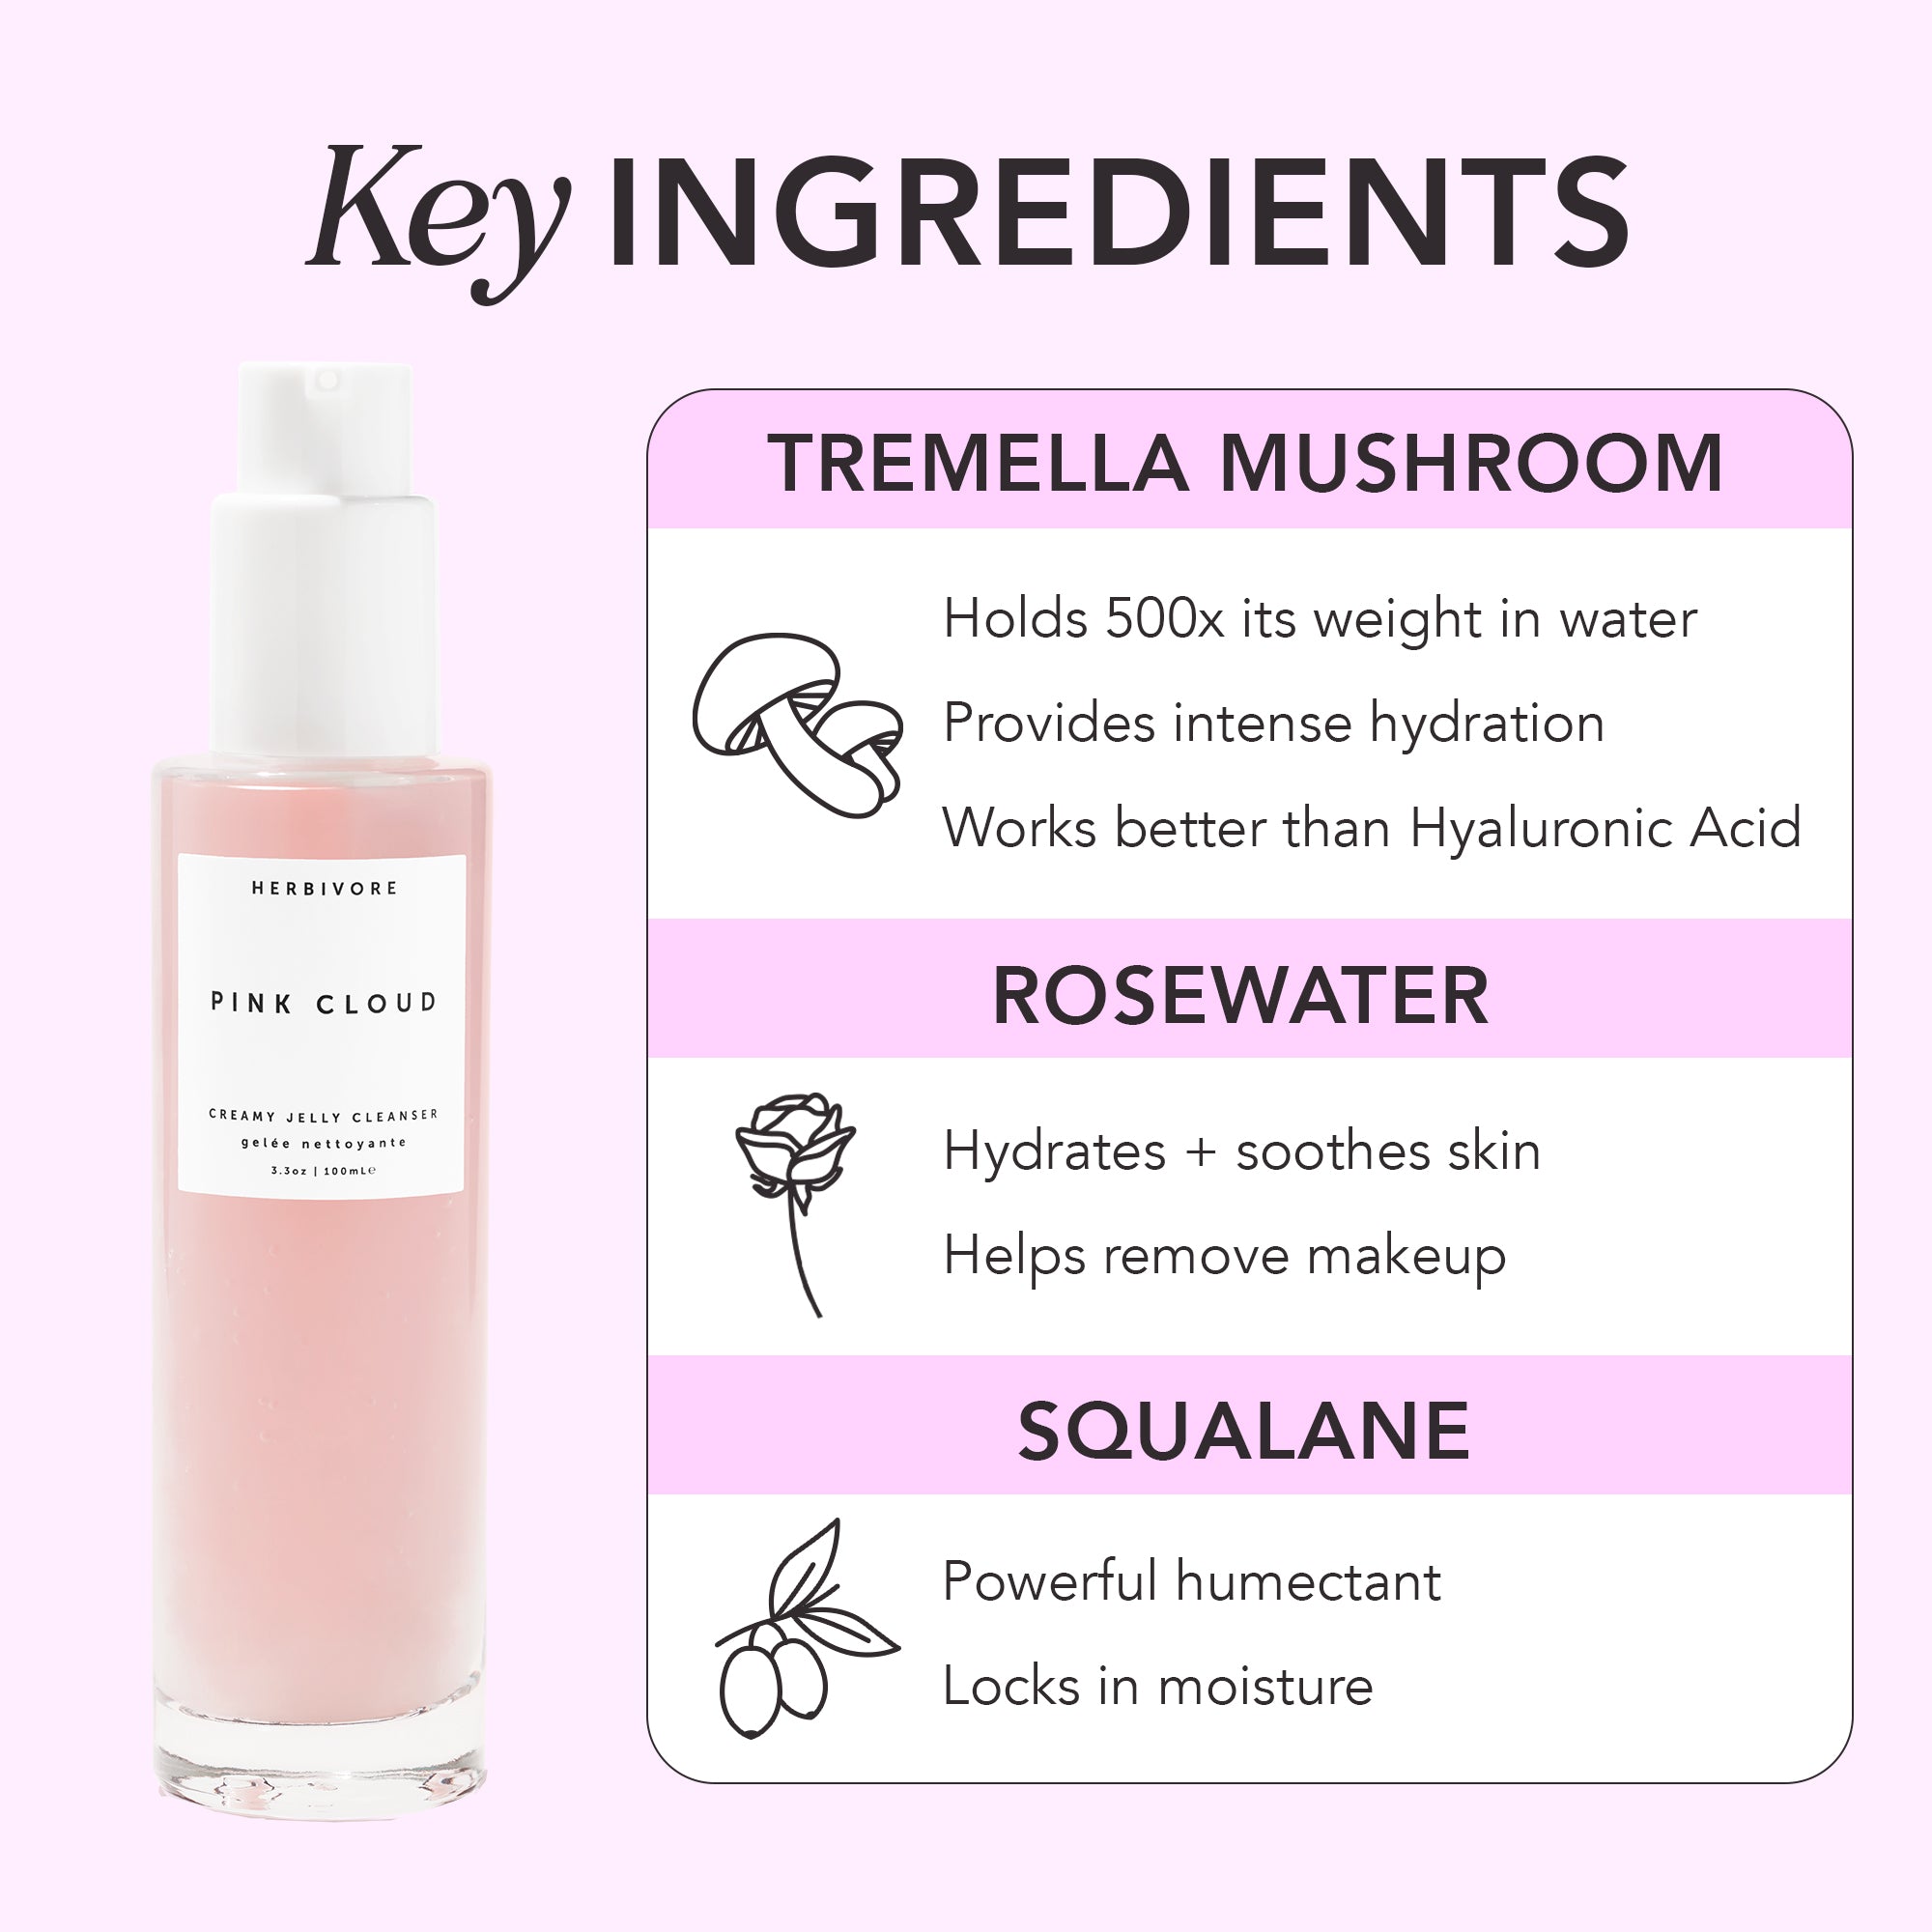 PINK CLOUD Rosewater + Tremella Creamy Jelly Cleanser